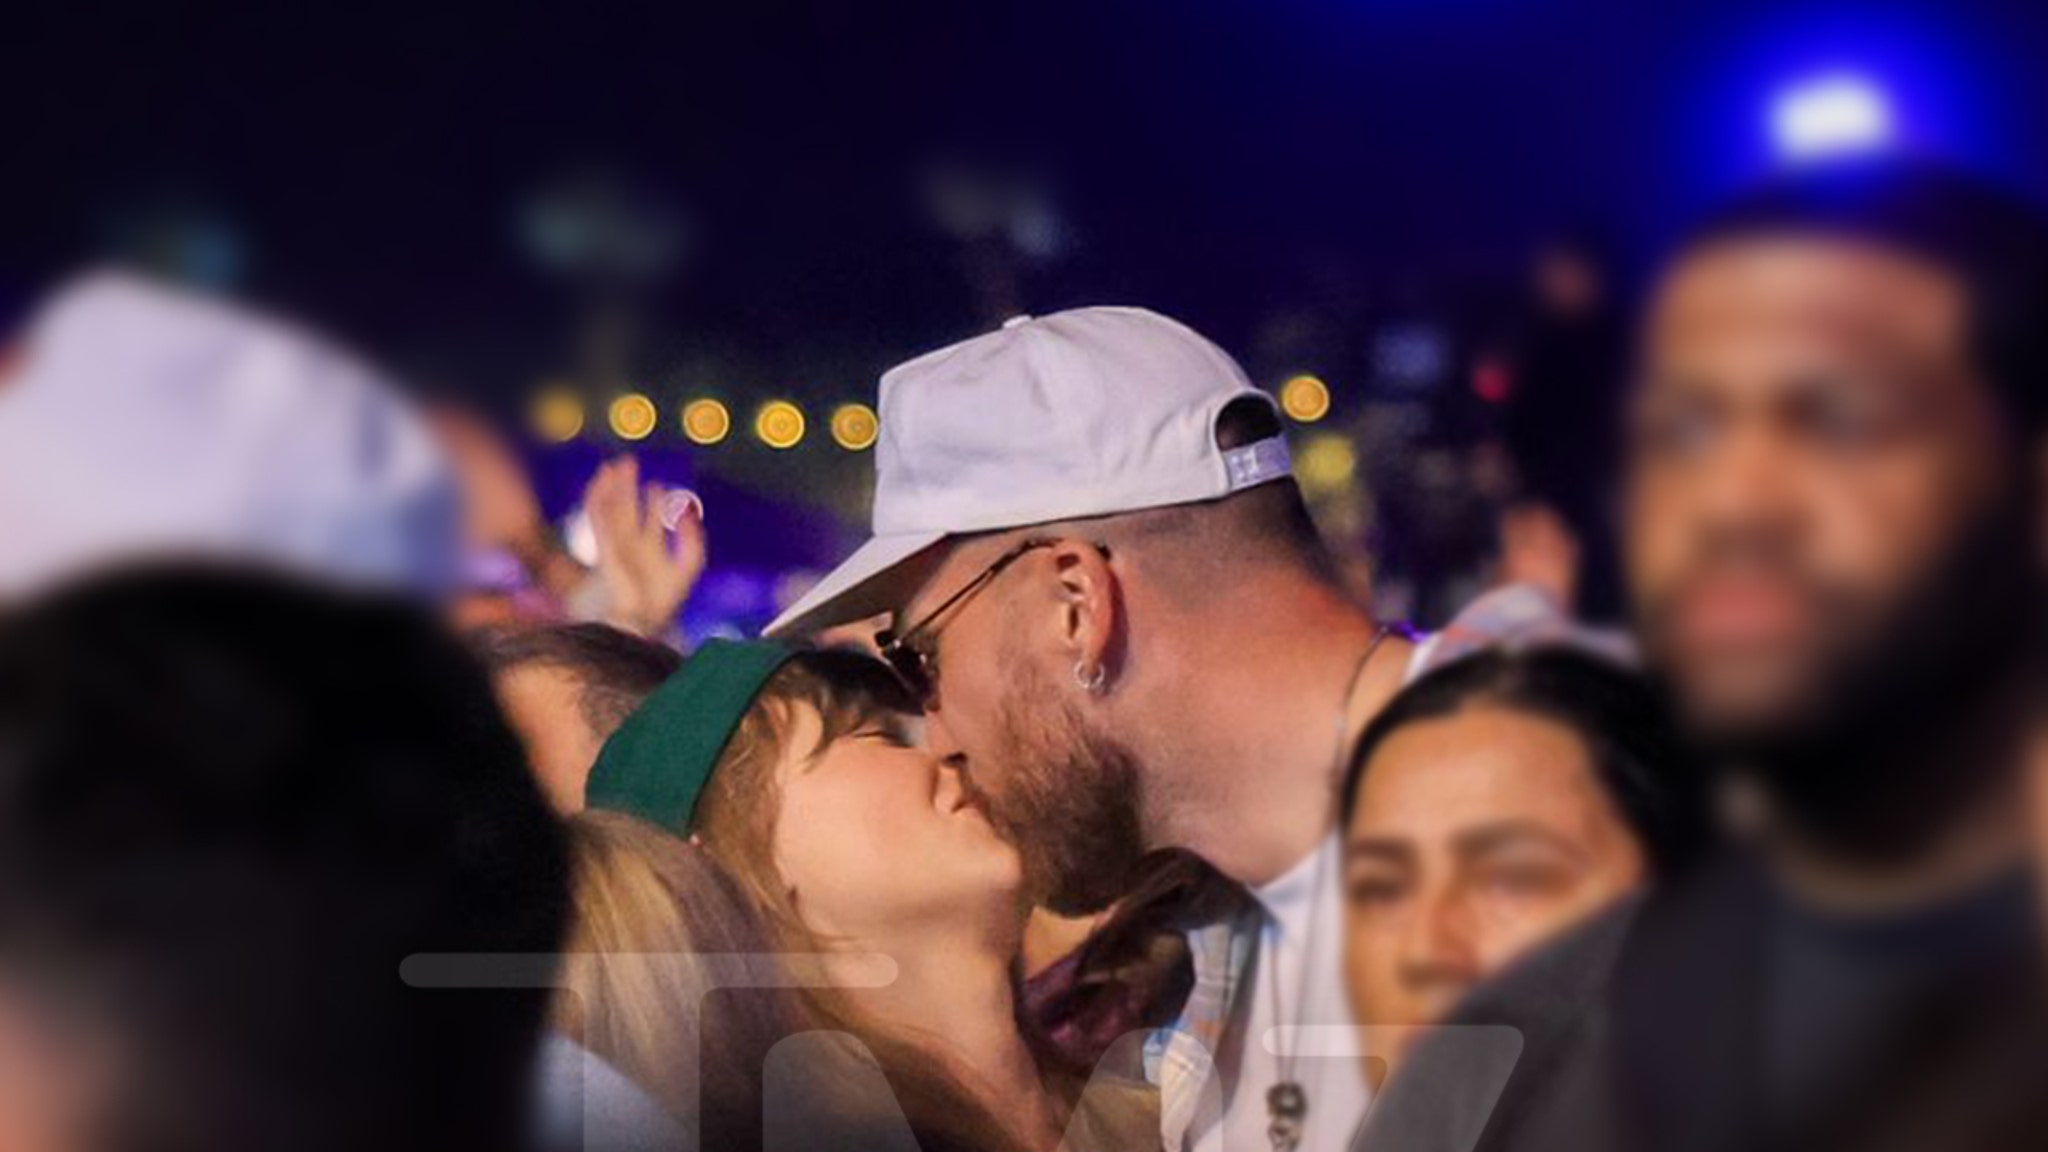 New Photos of Taylor and Travis Kissing in Middle of Coachella Crowd